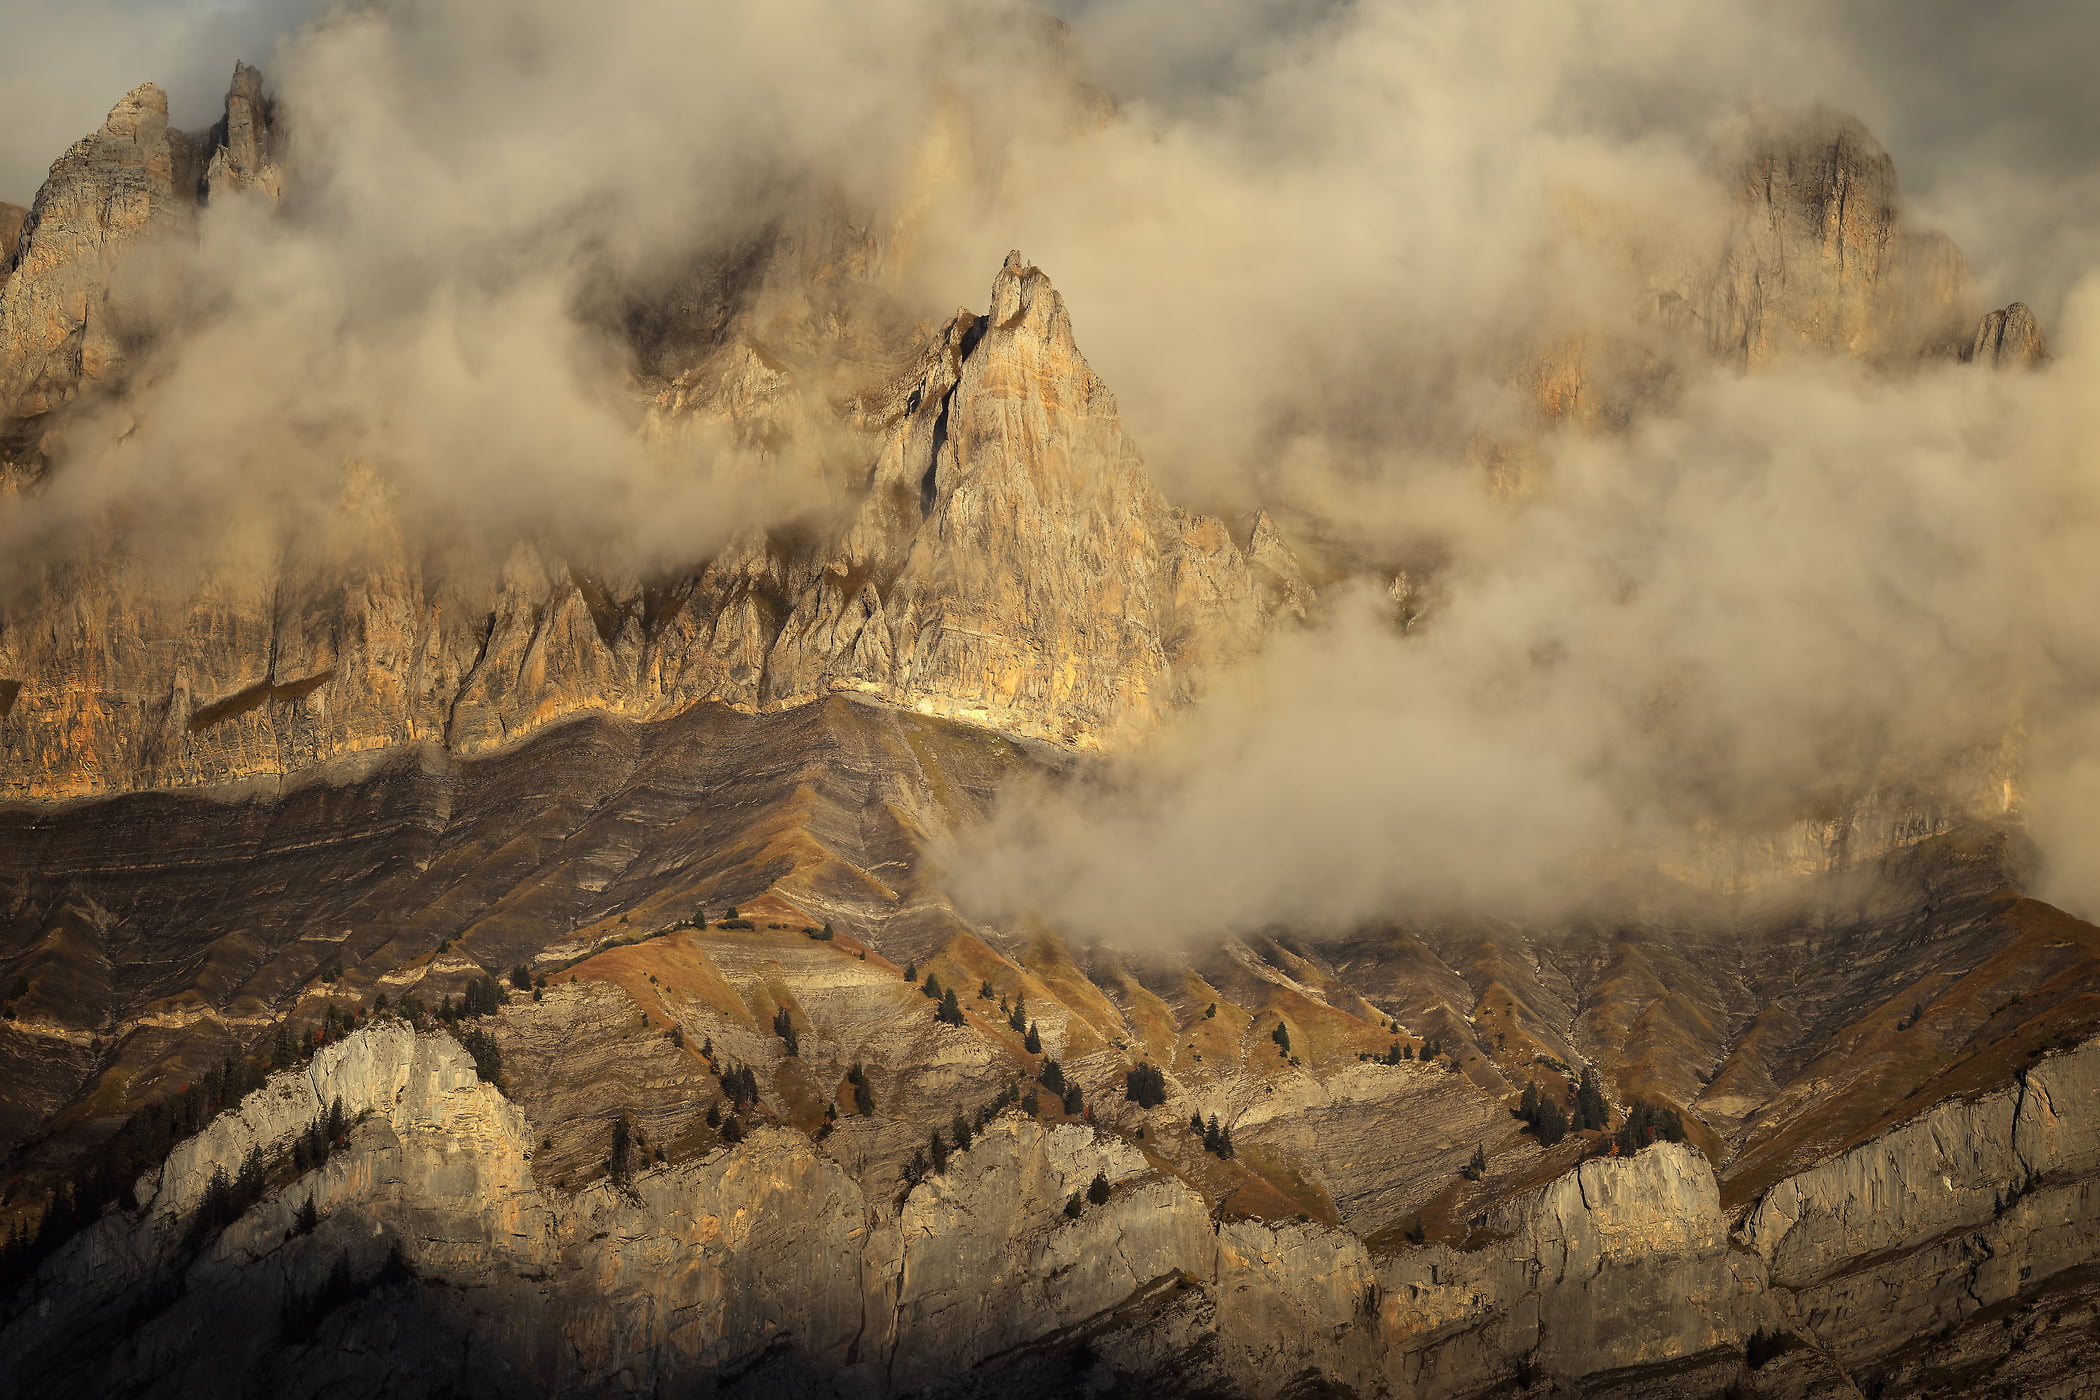 132 megapixels! A very high resolution, large-format VAST photo print of rocky cliffs on a mountain with clouds; landscape photograph created by Alexandre Deschaumes.